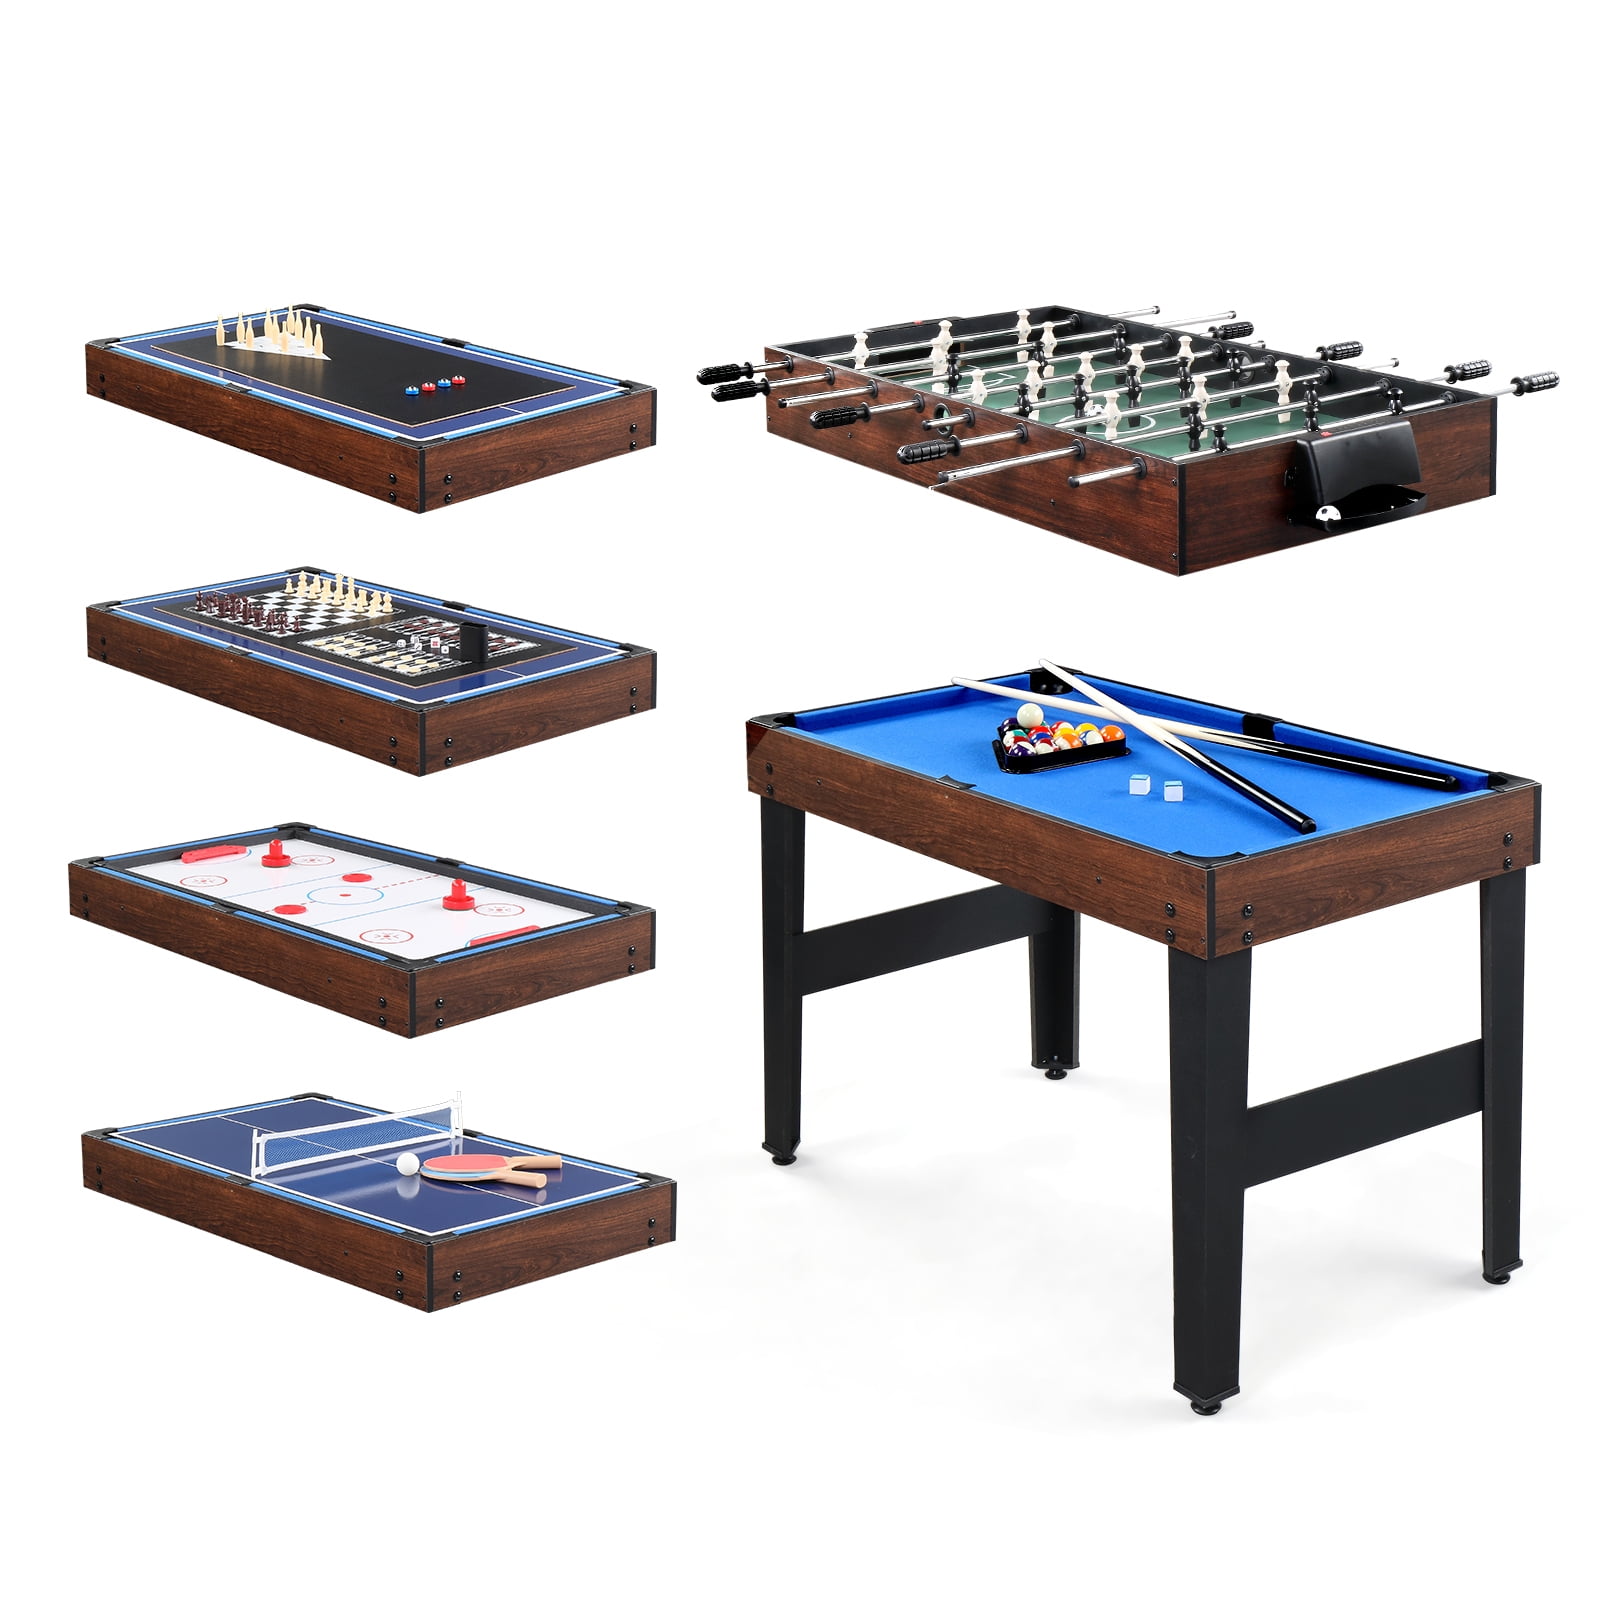 Giantex 10-in-1 Combo Game Table Set, Multi Game Table for Home, Game Room  